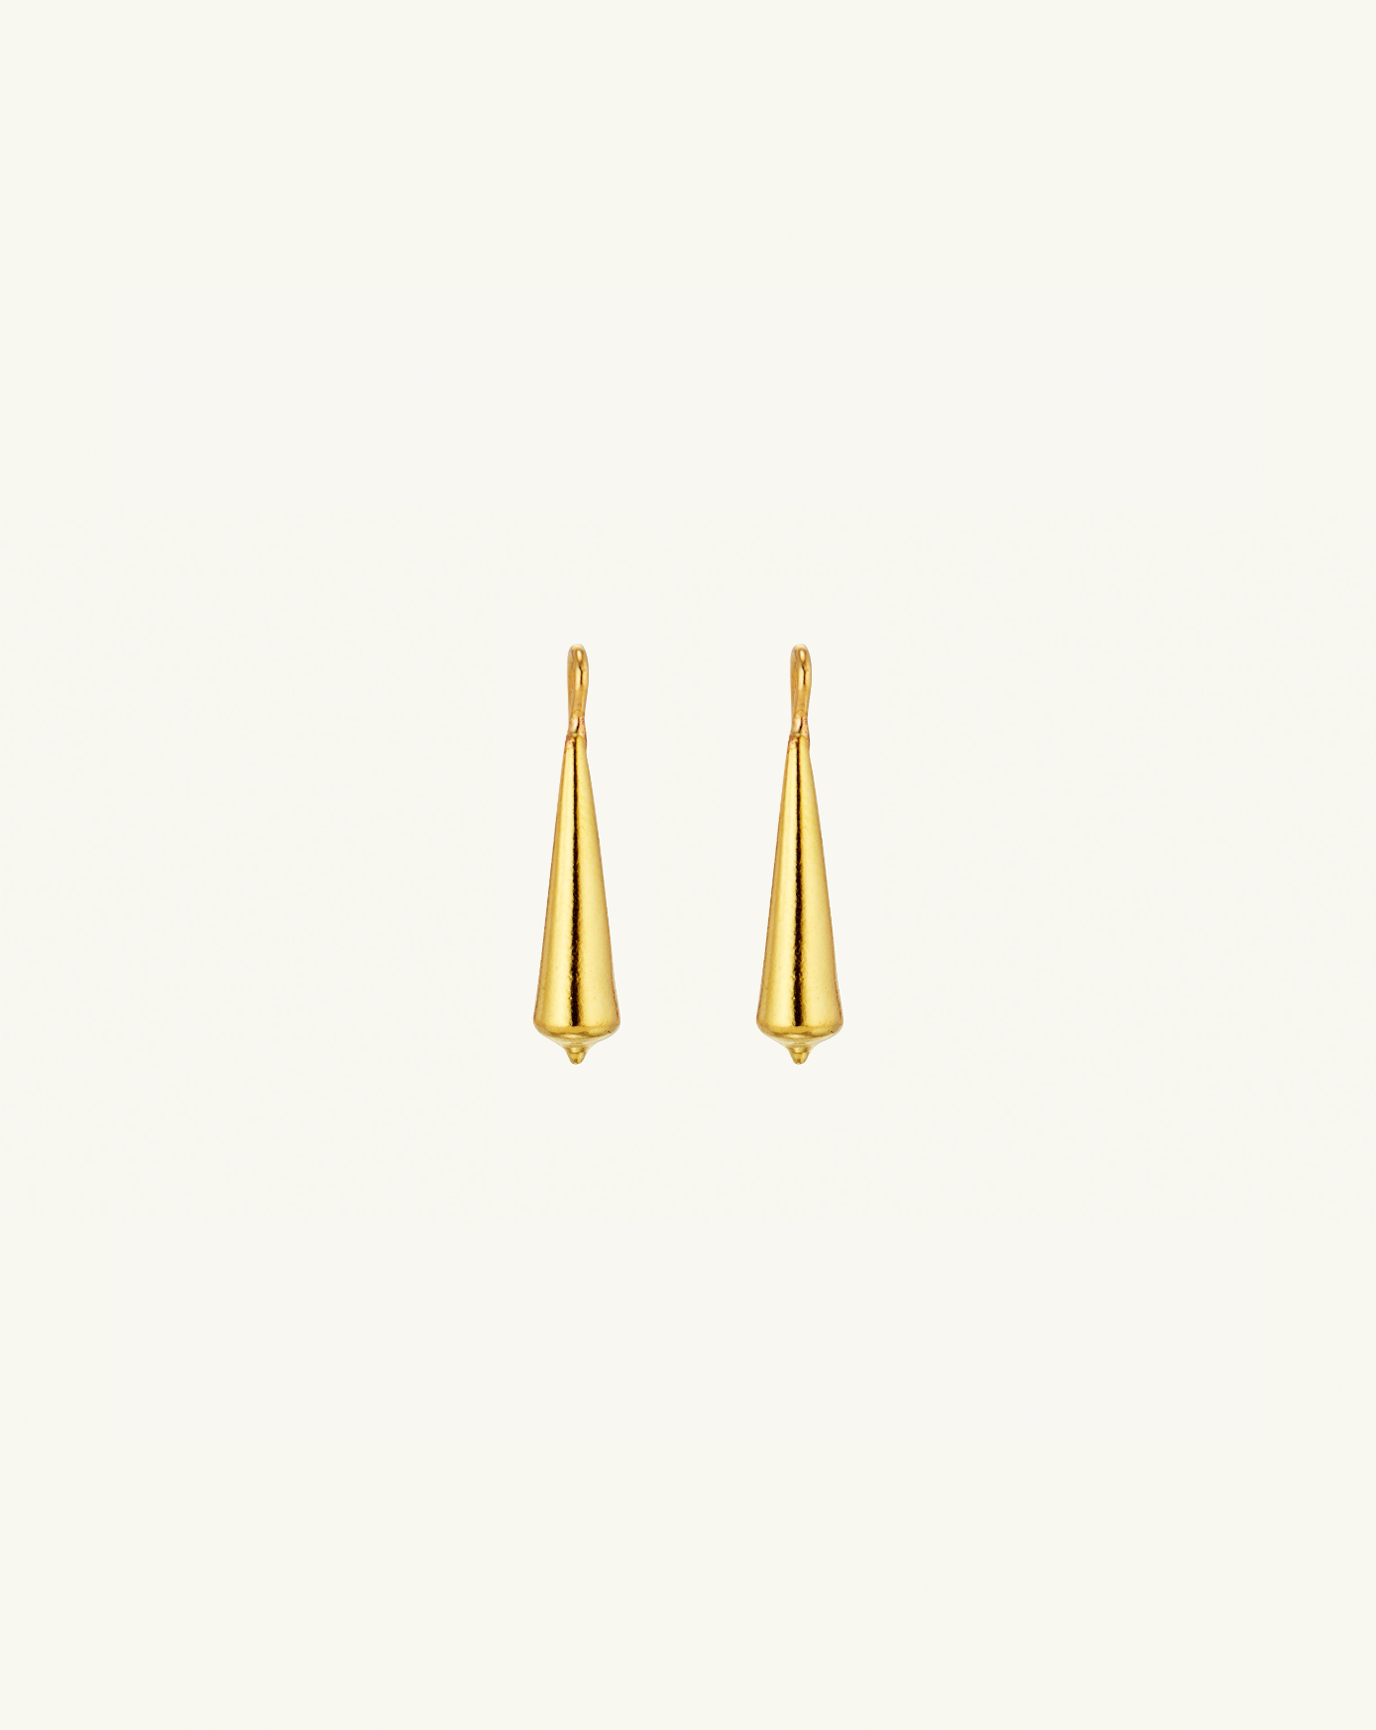 Product image of the tapered gold pod earrings